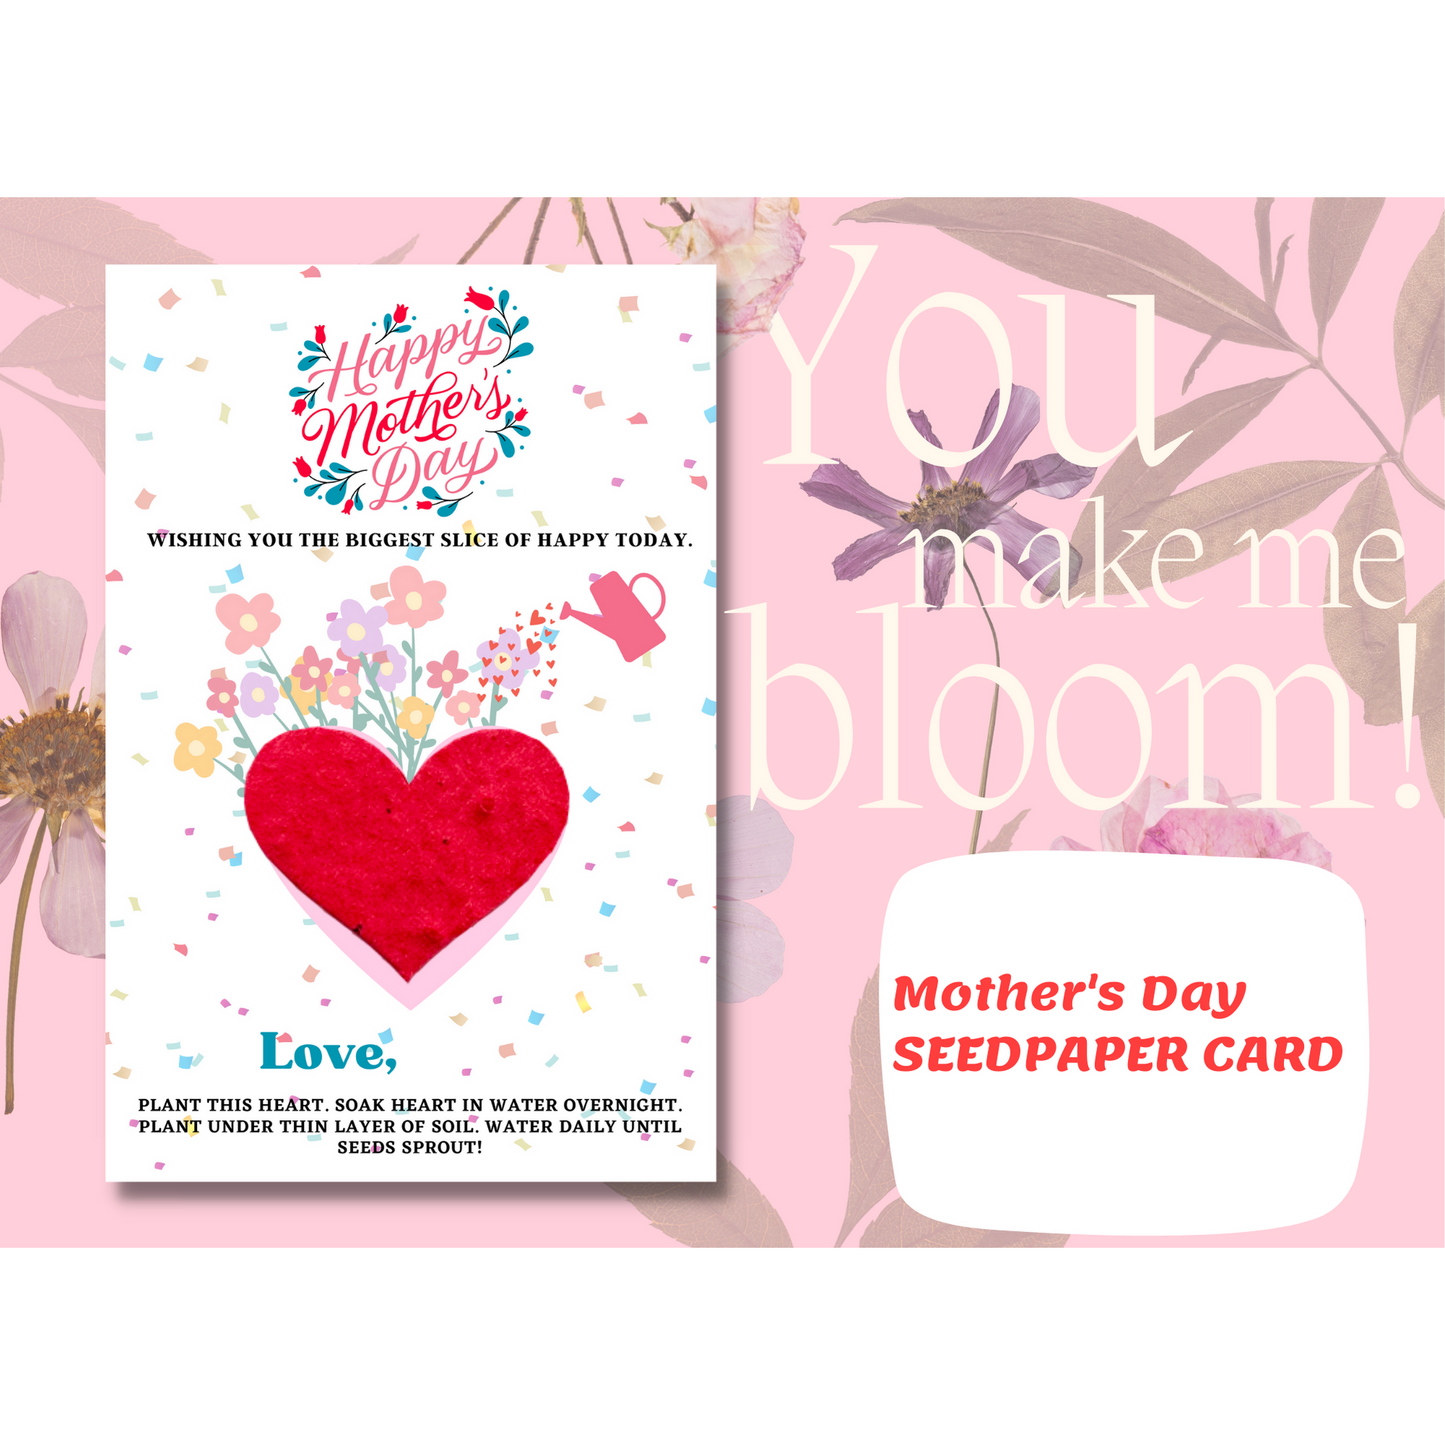 Wild flower Seeds Paper Heart Mother's Day Card